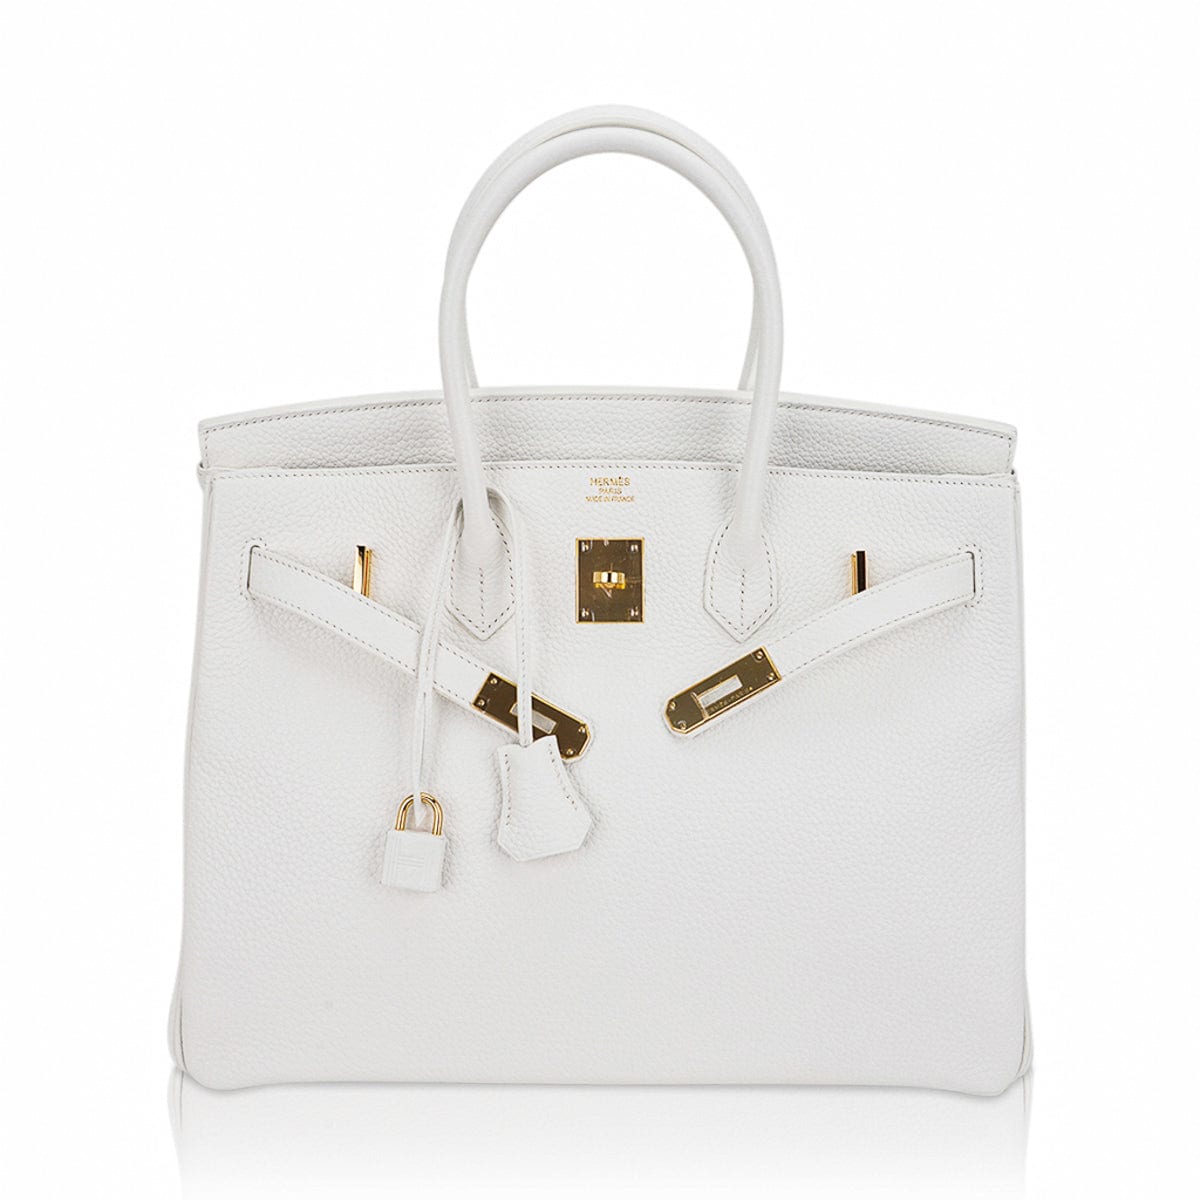 Hermes Birkin 35 Bag White Clemence Leather with Gold Hardware – Mightychic